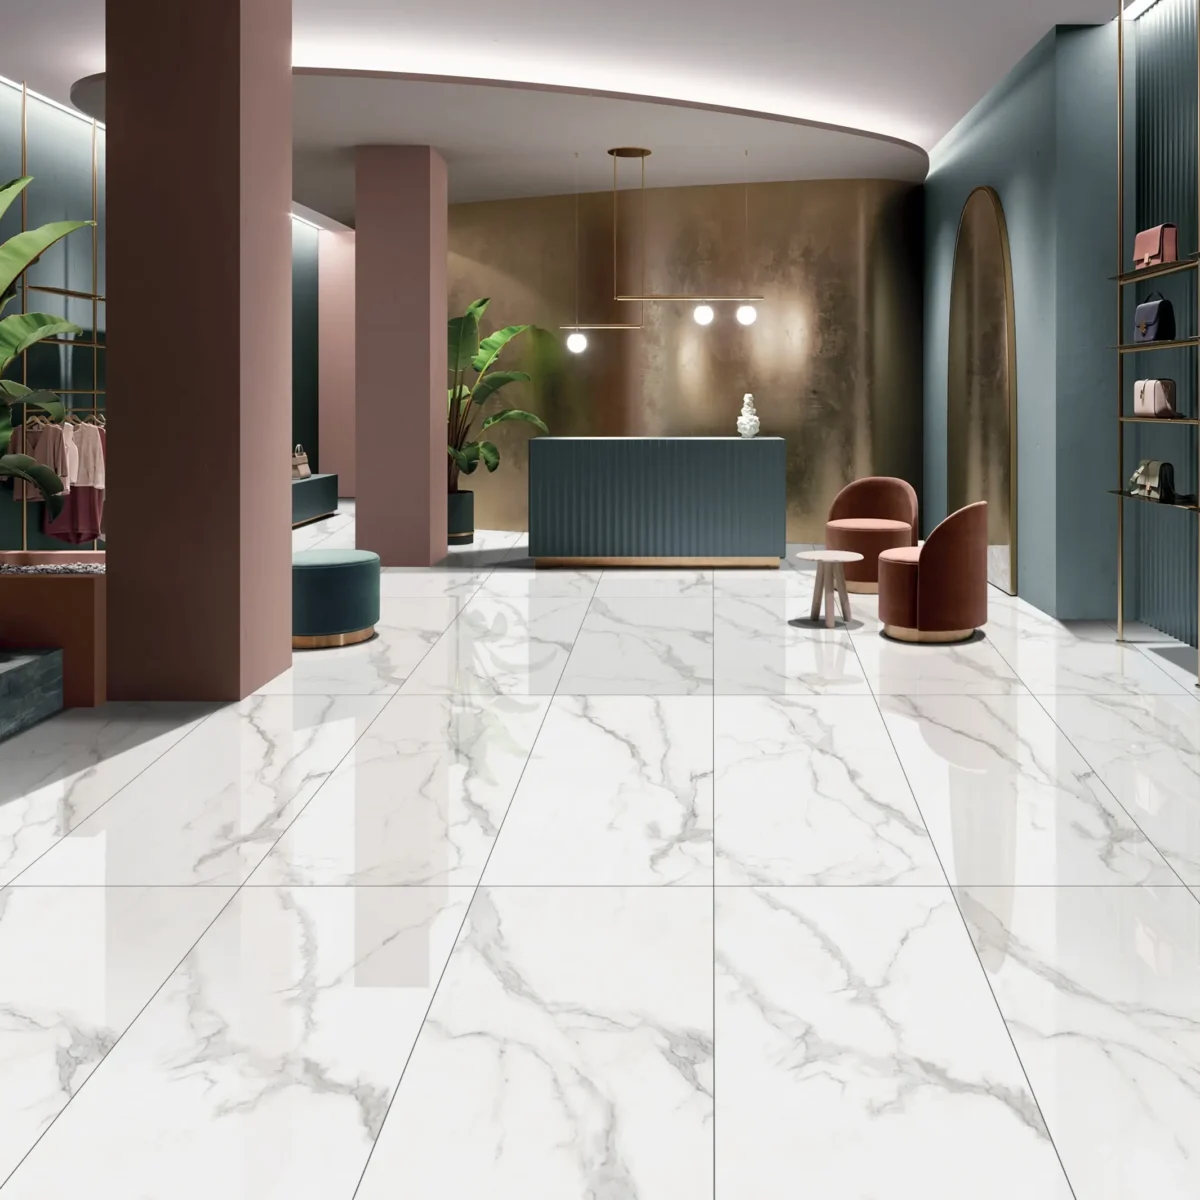 24x48 polished porcelain tiles preview | 600x1200 polished porcelain tiles preview | 60x120 polished porcelain tiles preview